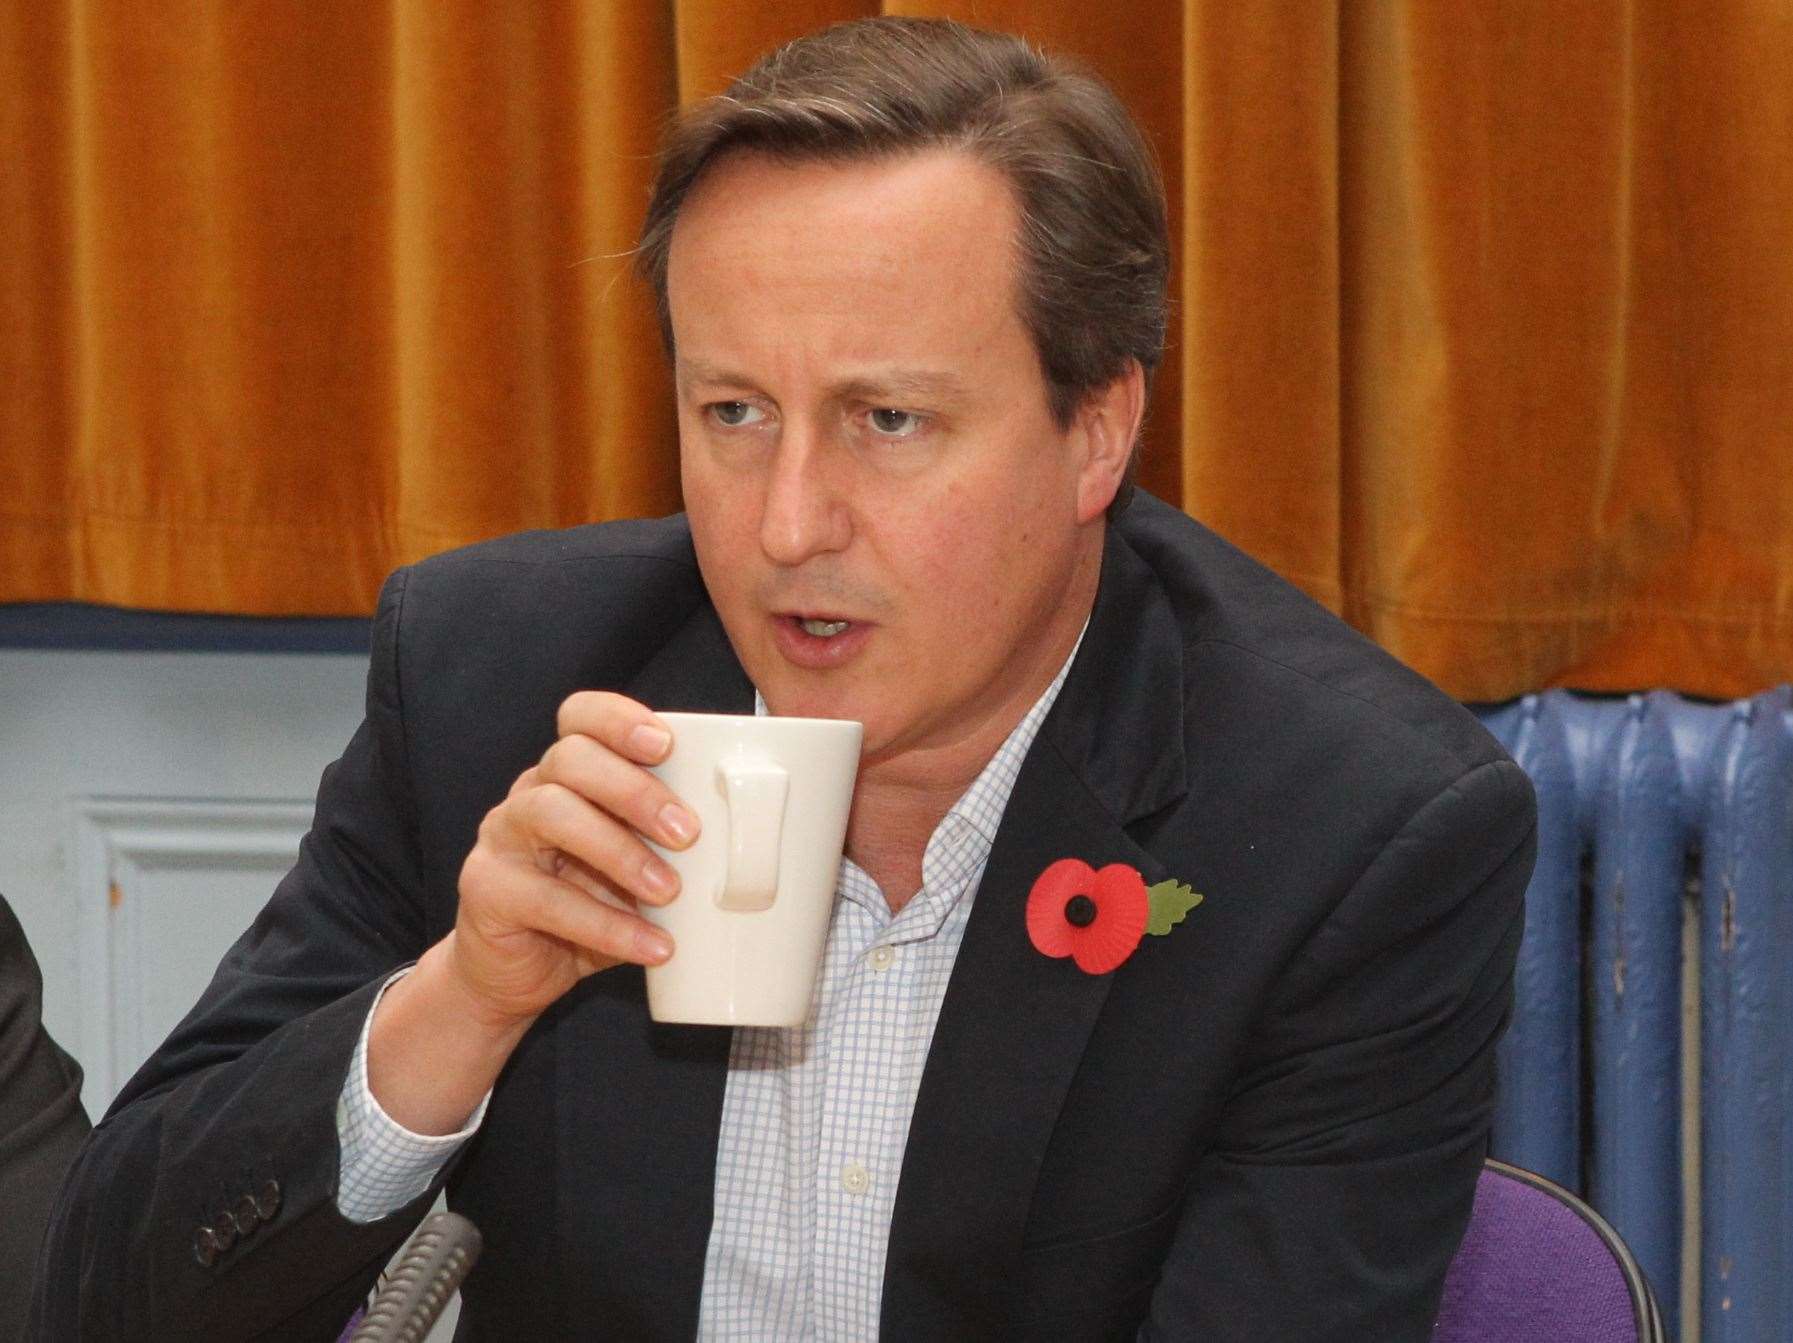 David Cameron has been told he won't be the next MP for Sevenoaks